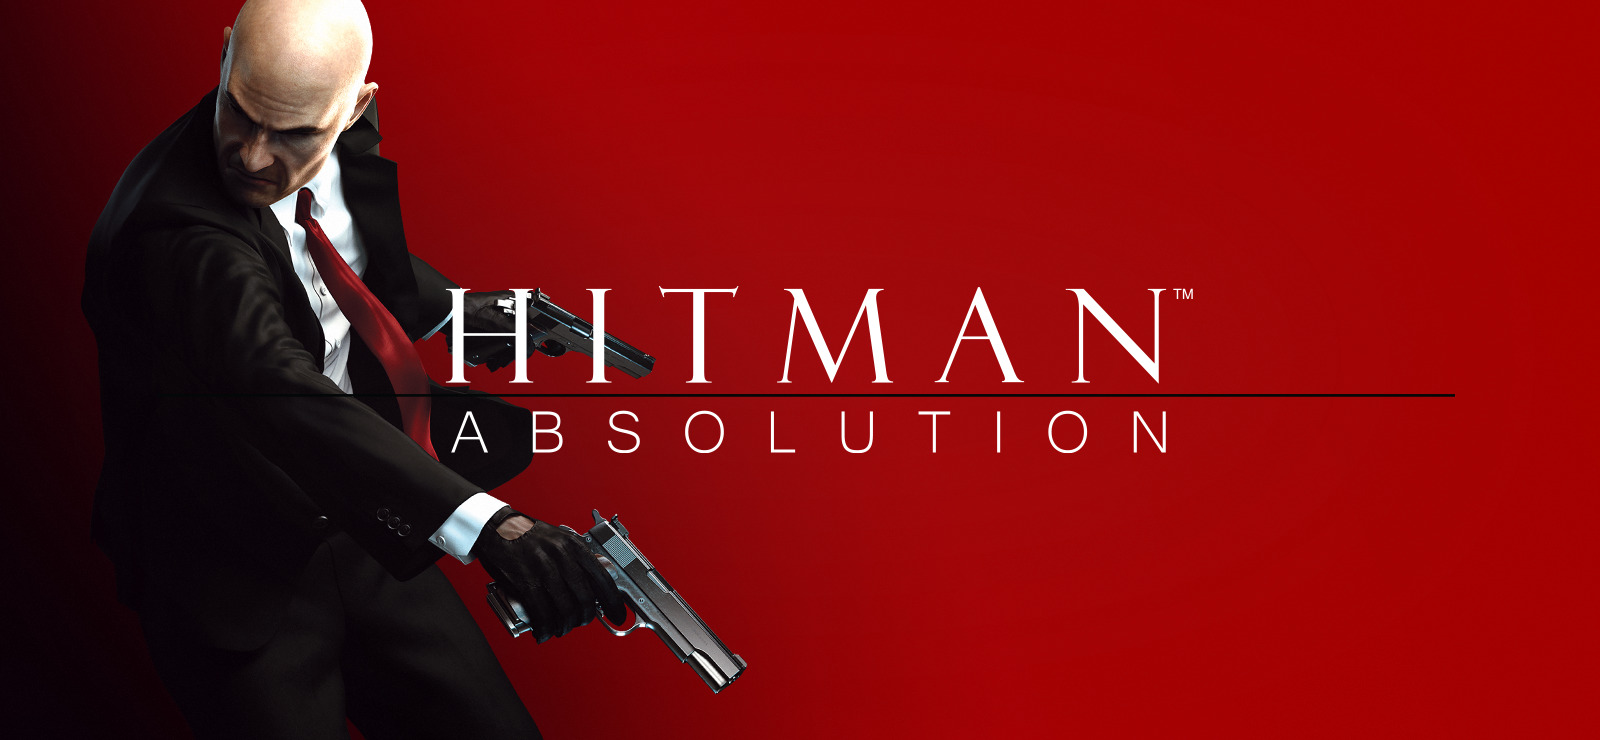 Hitman Absolution PS4 Version Full Game Free Download